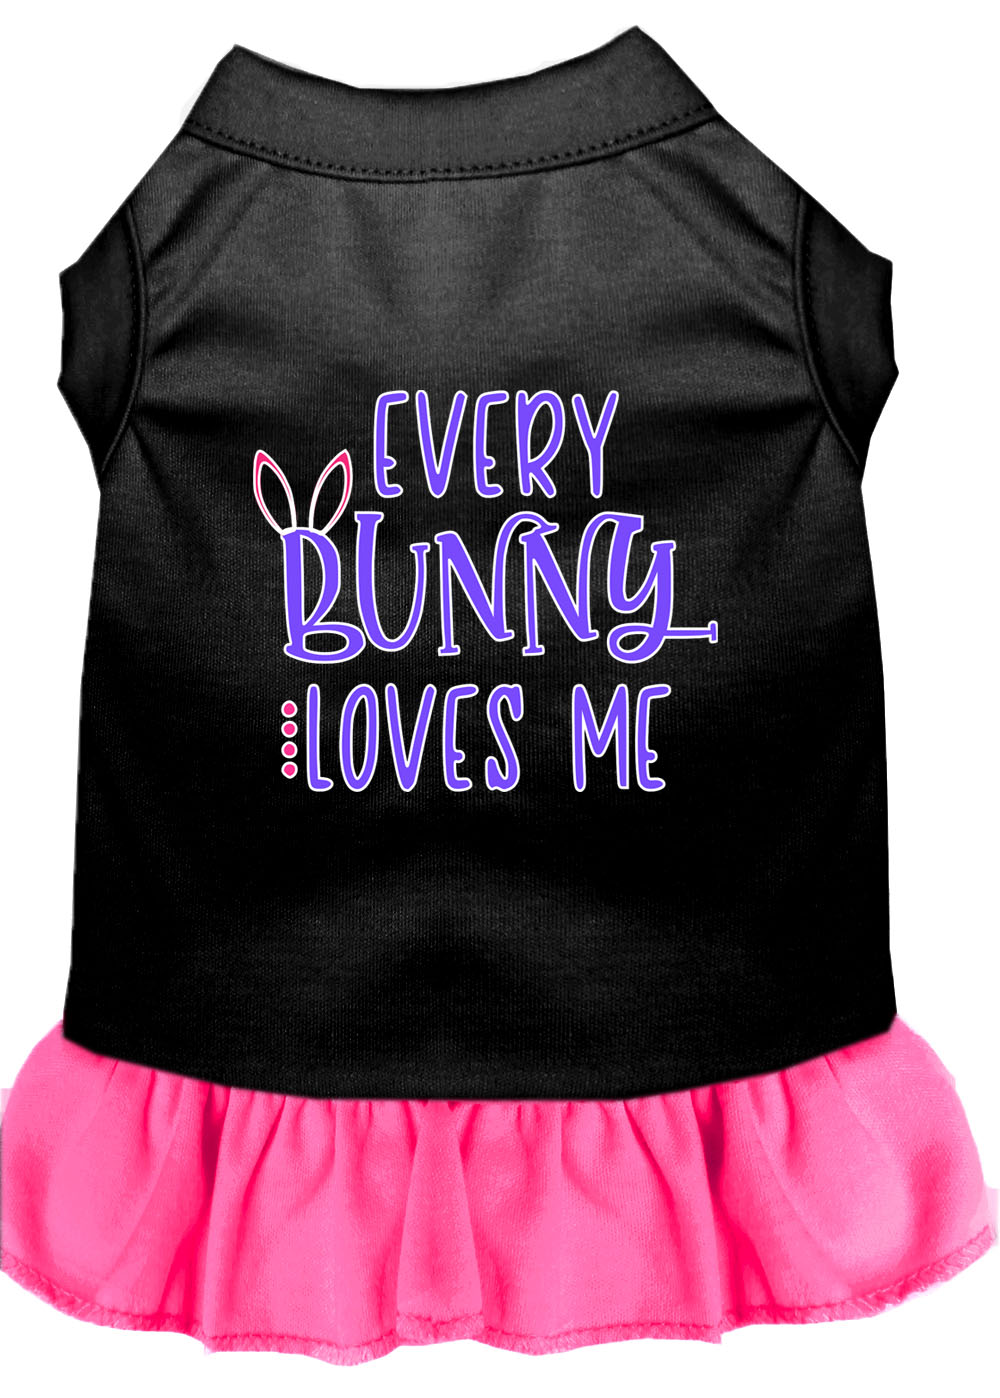 Every Bunny Loves me Screen Print Dog Dress Black with Bright Pink Med